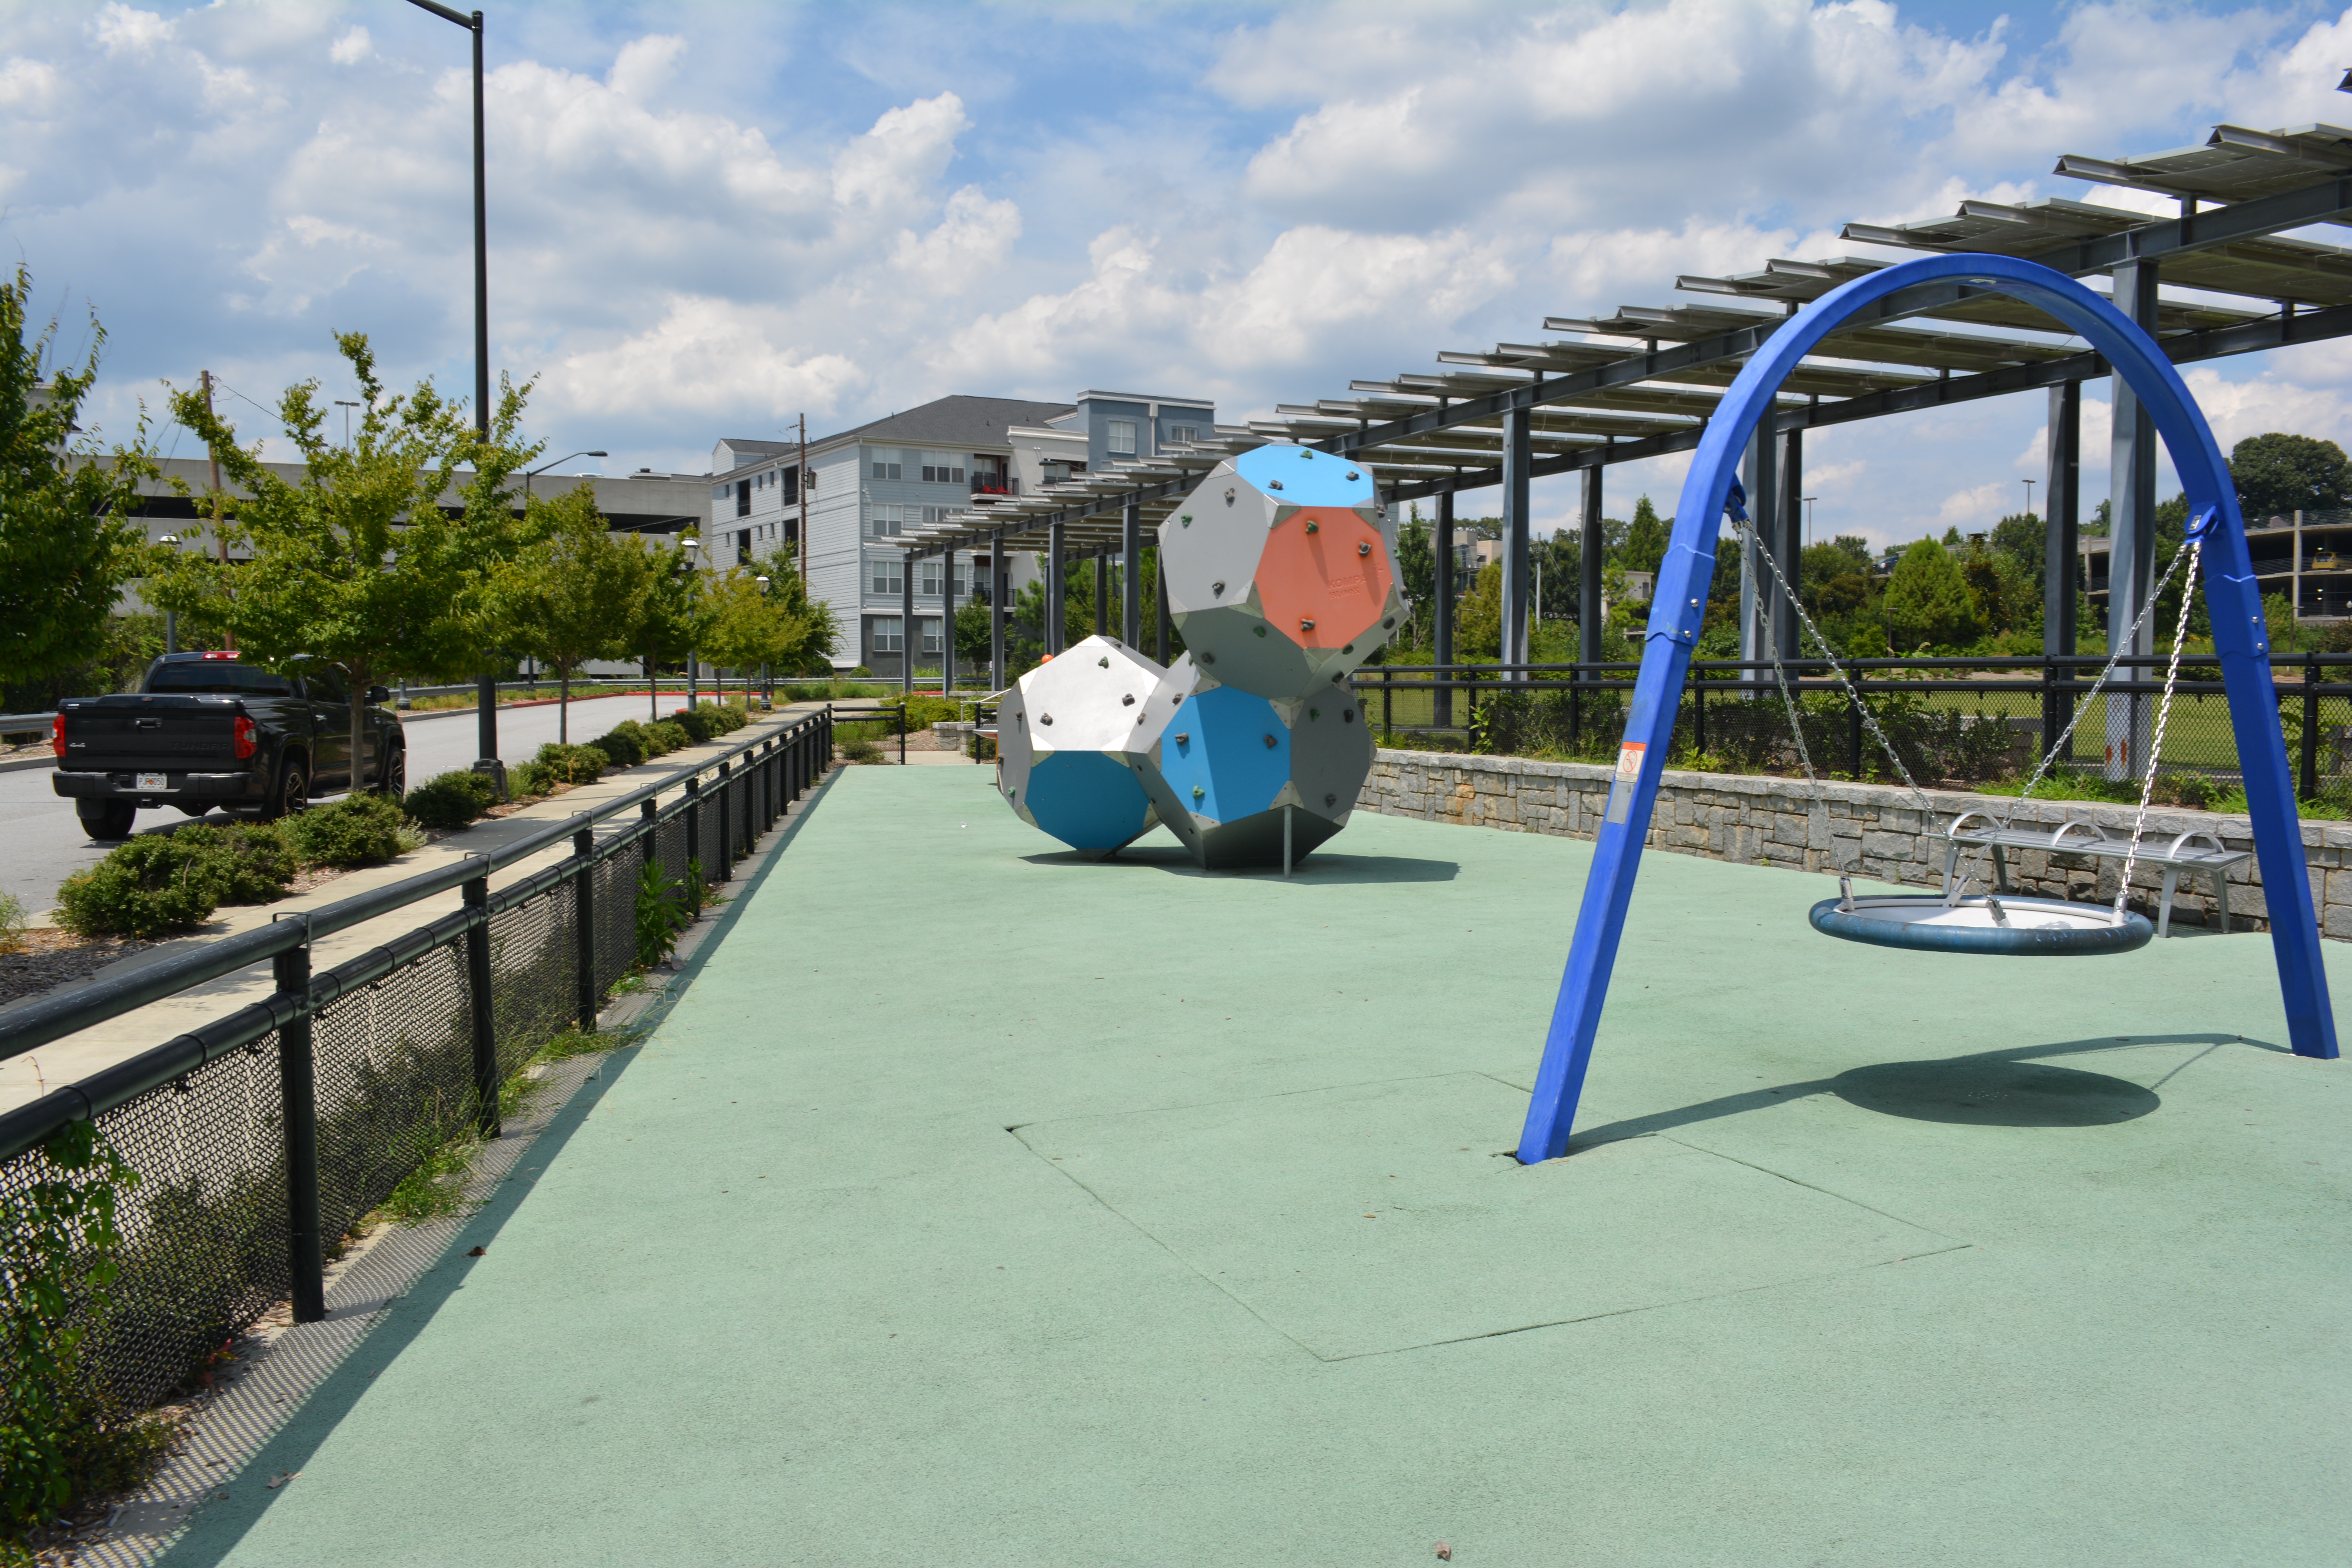 The playground is surrounded by an area maintained with organic land regimens. This system promotes a healthy greenspace and landscaping.